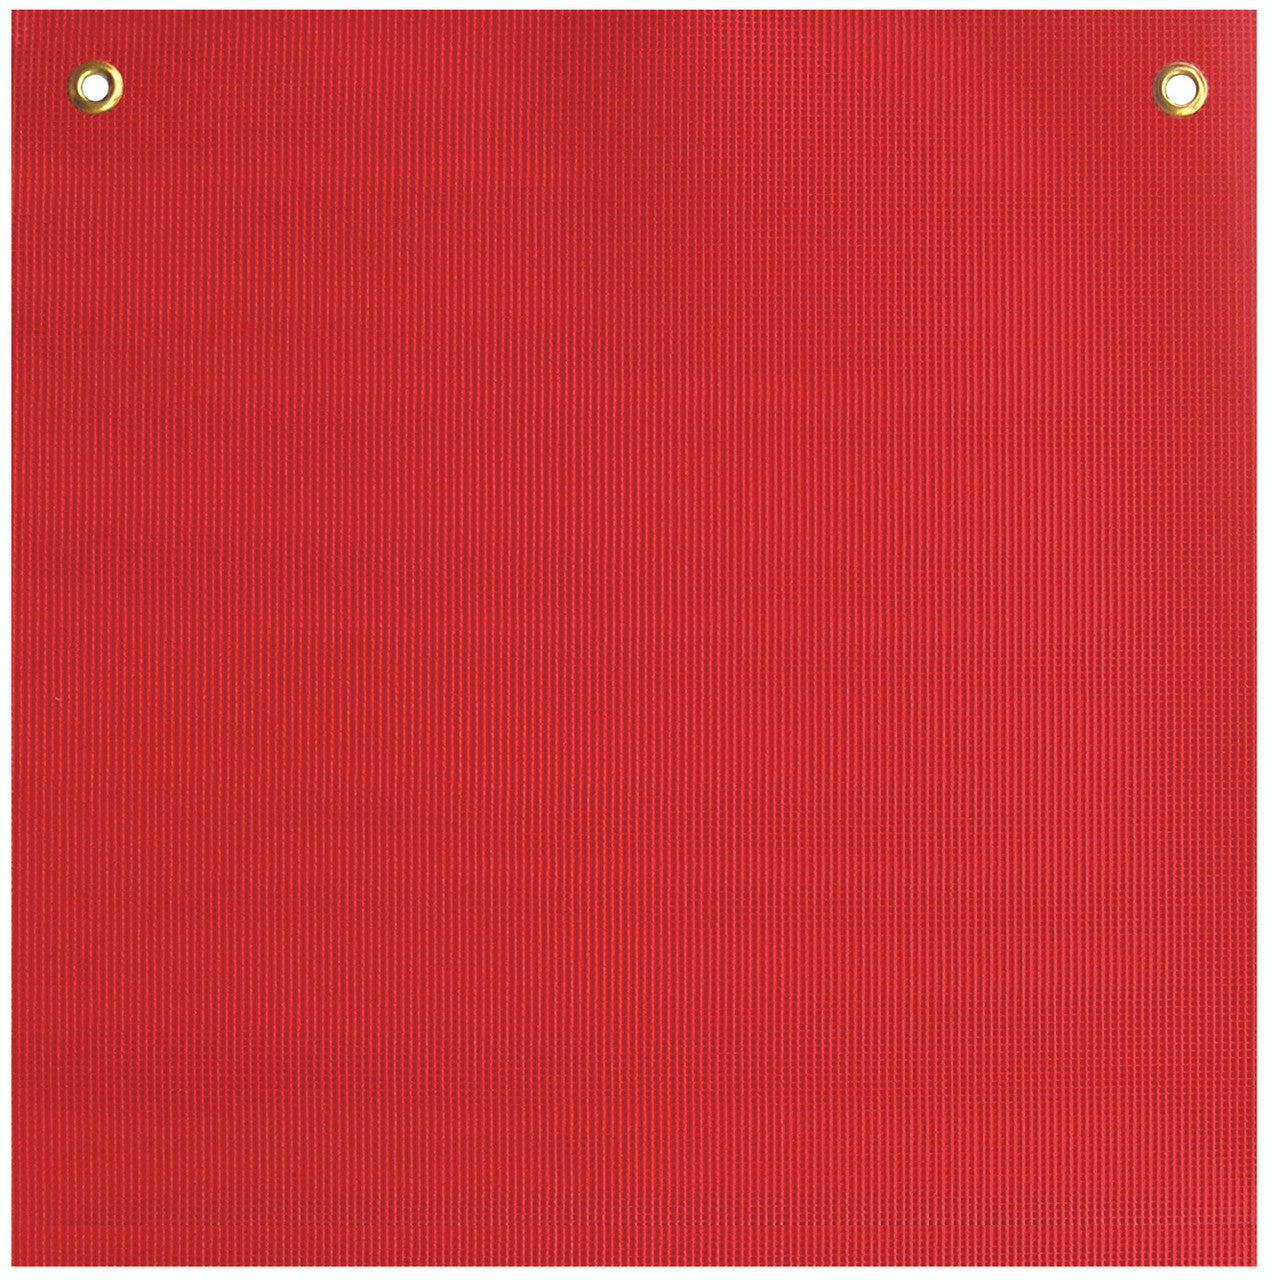 18-Inch by 18-Inch Red Mesh Safety Flag with Grommets (49893-12)